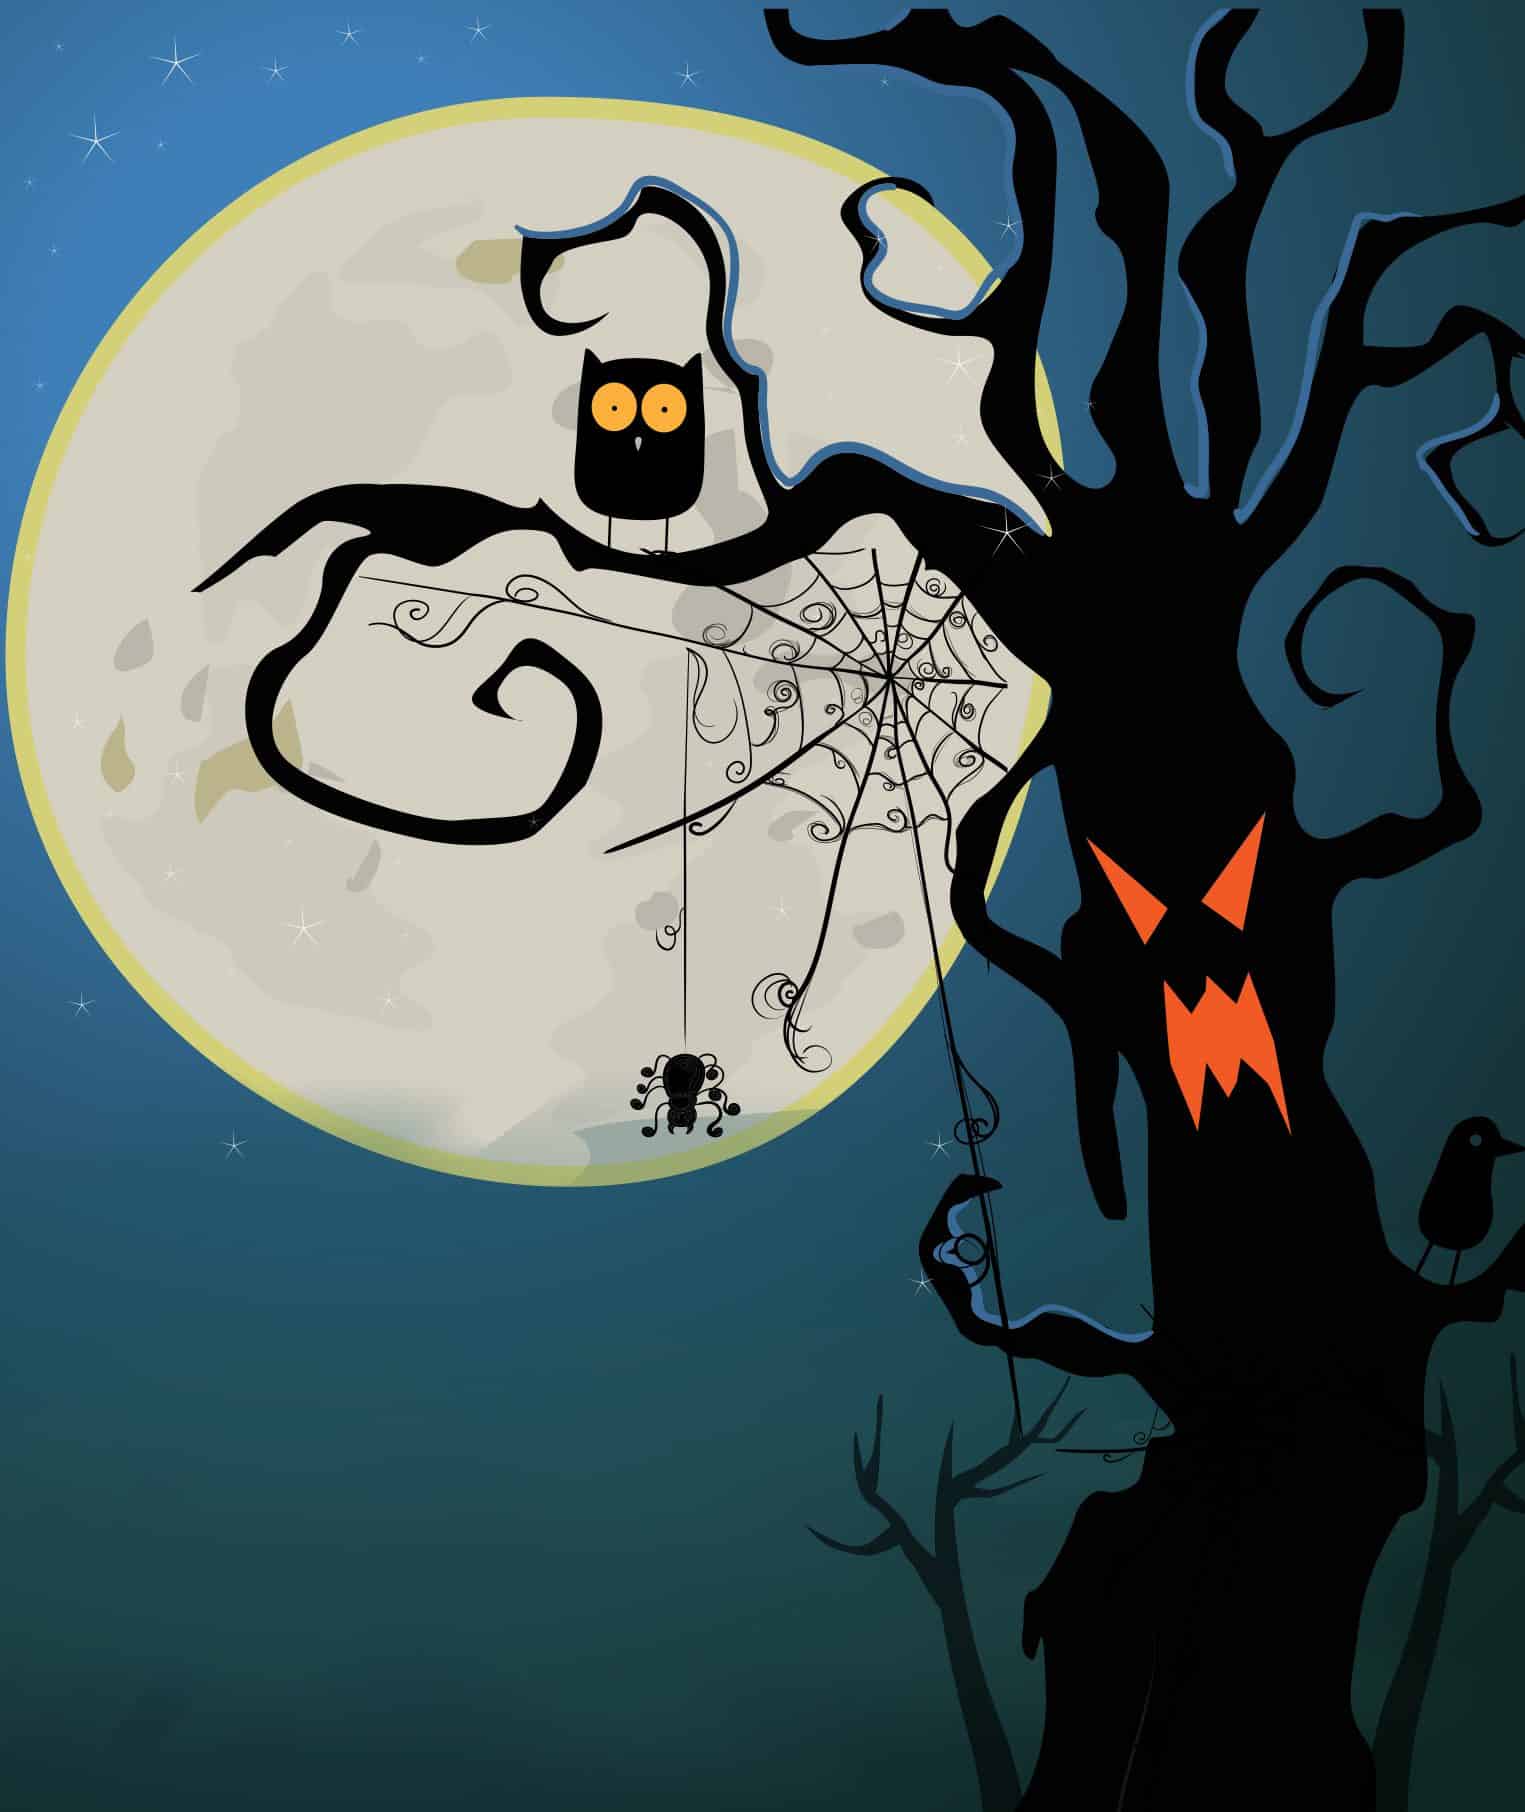 A creepy halloween illustration there is a spooky black tree with orange eyes and mouth the branches are all curlet and have a spiders web, spider and owl with orange eyes perched on there. In the background is full moon domineering the night sky.